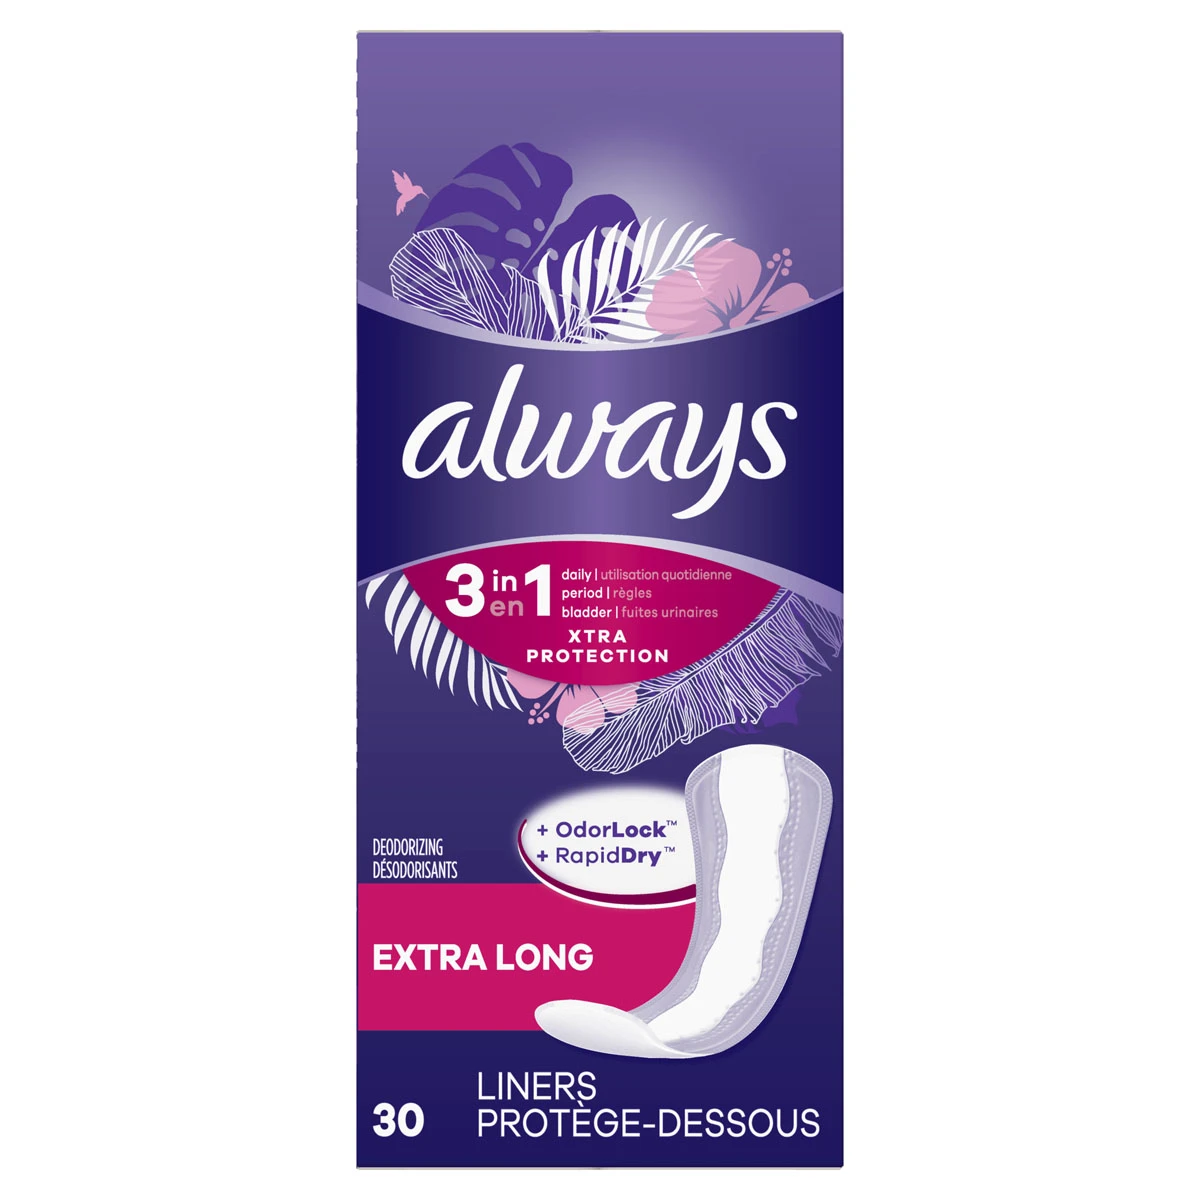 Always Xtra Protection 3-in-1 Daily Liners for Women, Extra Long